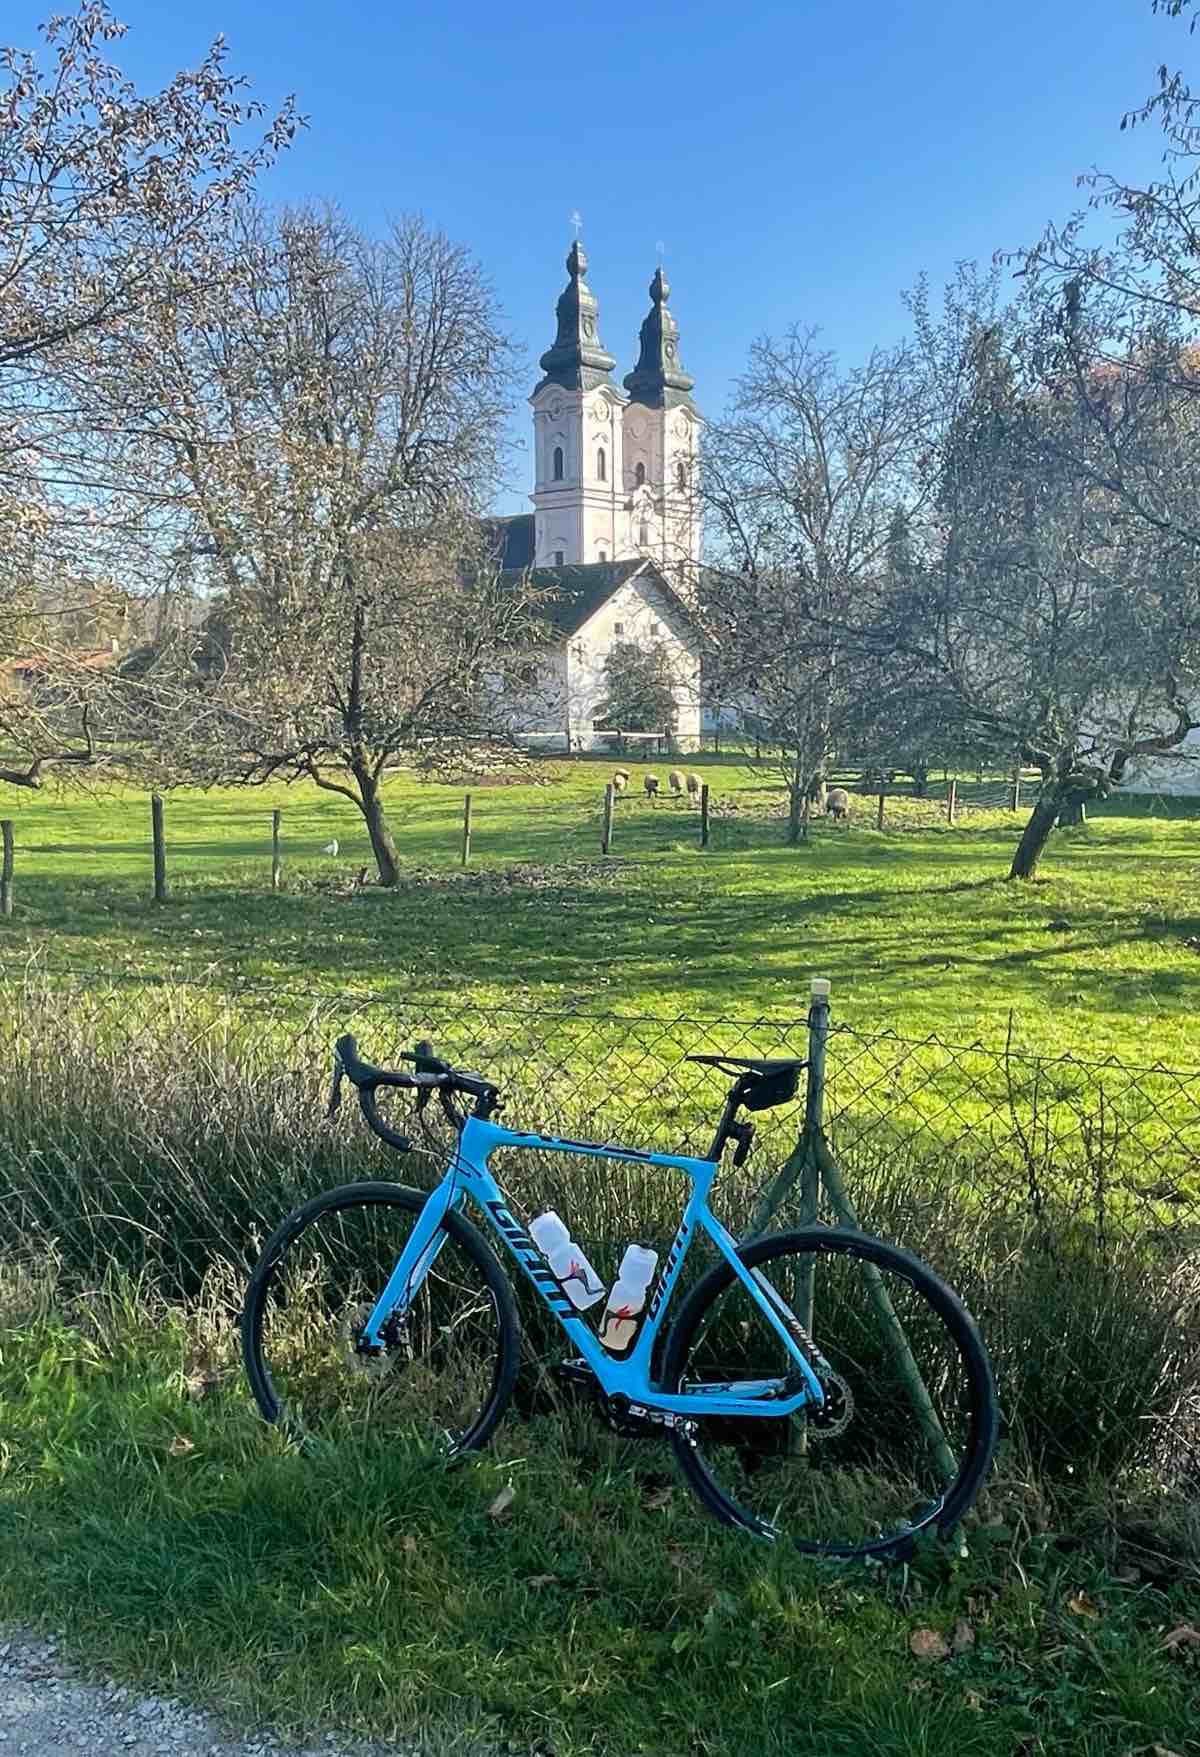 bikerumor pic of the day a bicycle leans against a wire fence surrounding a grassy field with sheep grazing and an abbey in the distance.